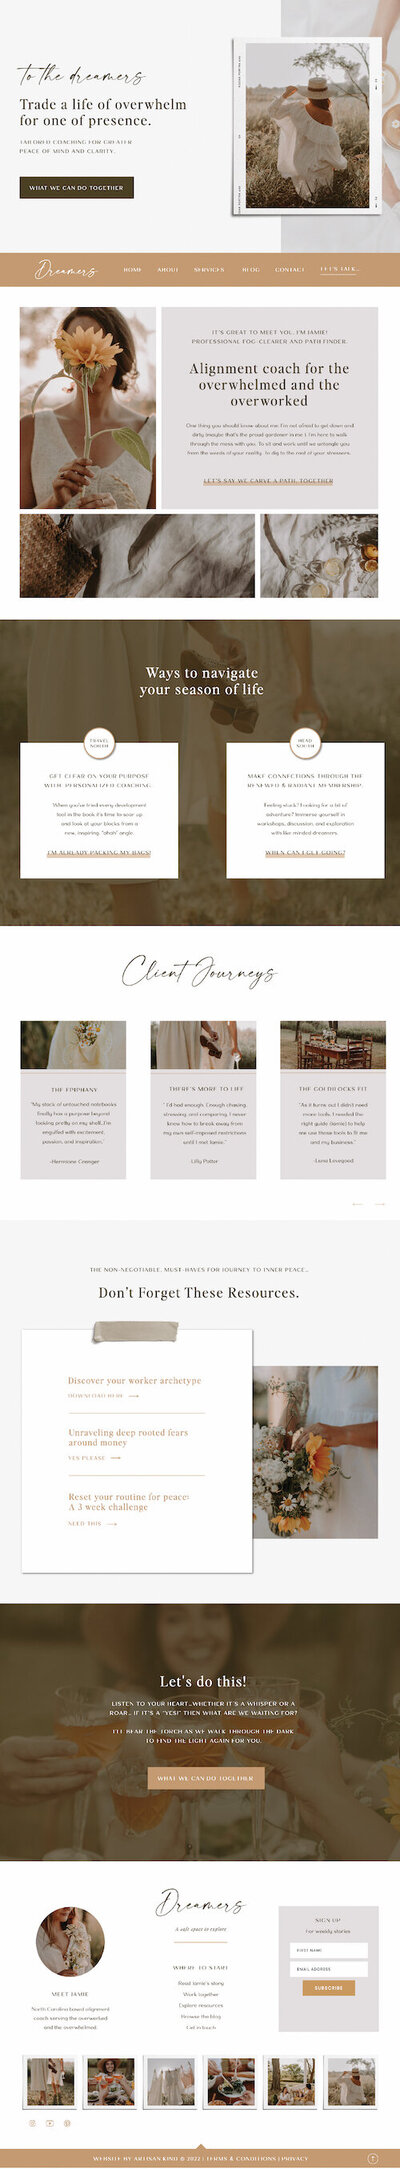 Website template with bright and lively, nature inspired images